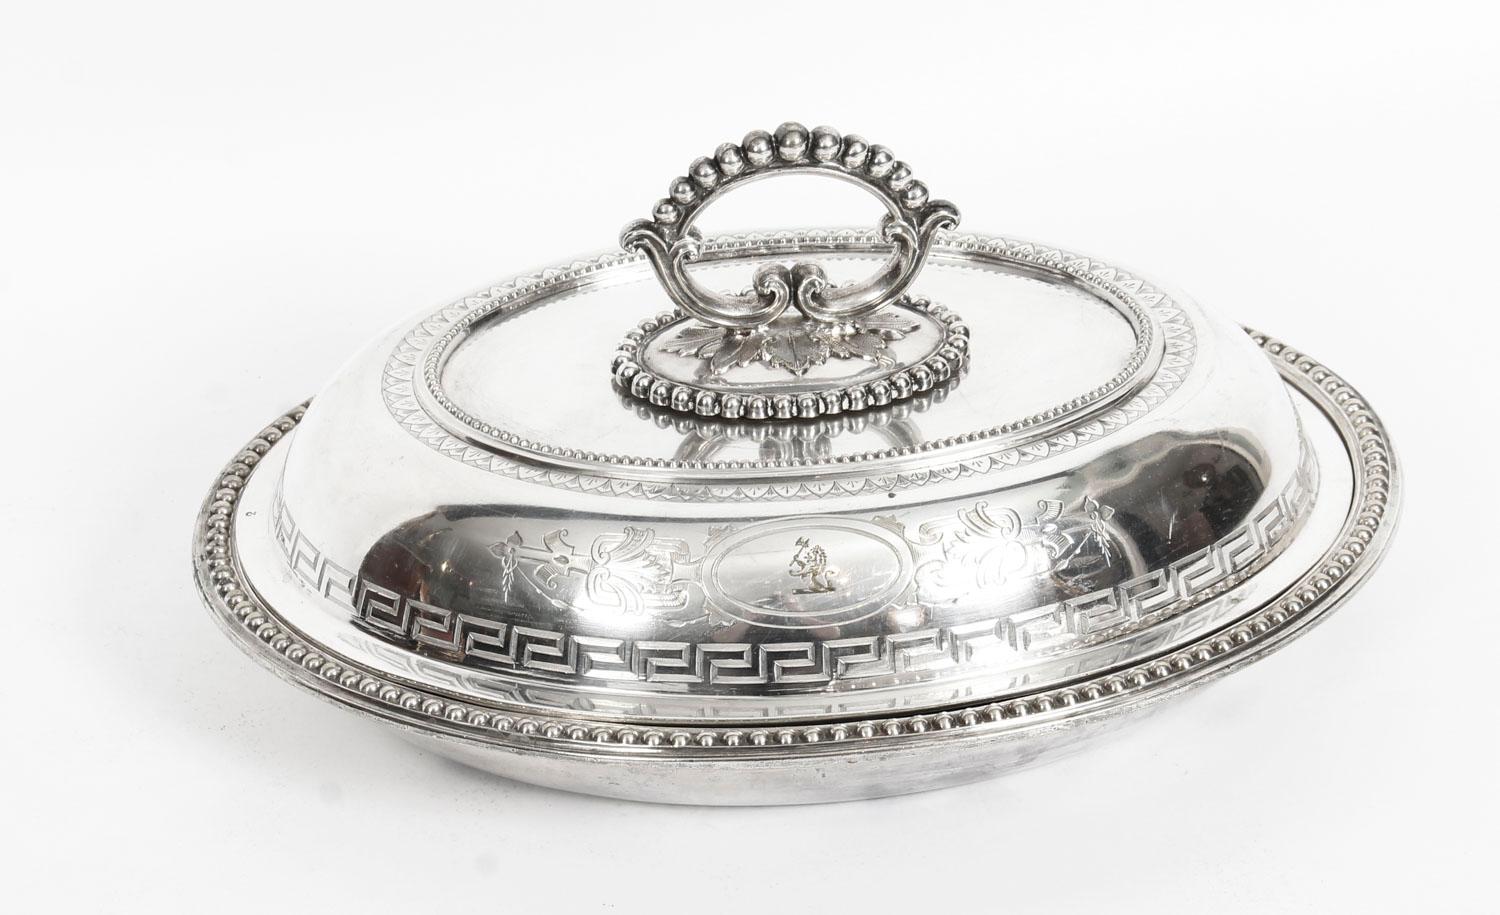 This is an a fine antique pair of English neoclassical silver plated entree dishes by the Goldsmiths Alliance Ltd Cornhill, London, circa 1860 in date.
 
The bright-cut engraving features leafy strapwork and bands of Greek key pattern. The